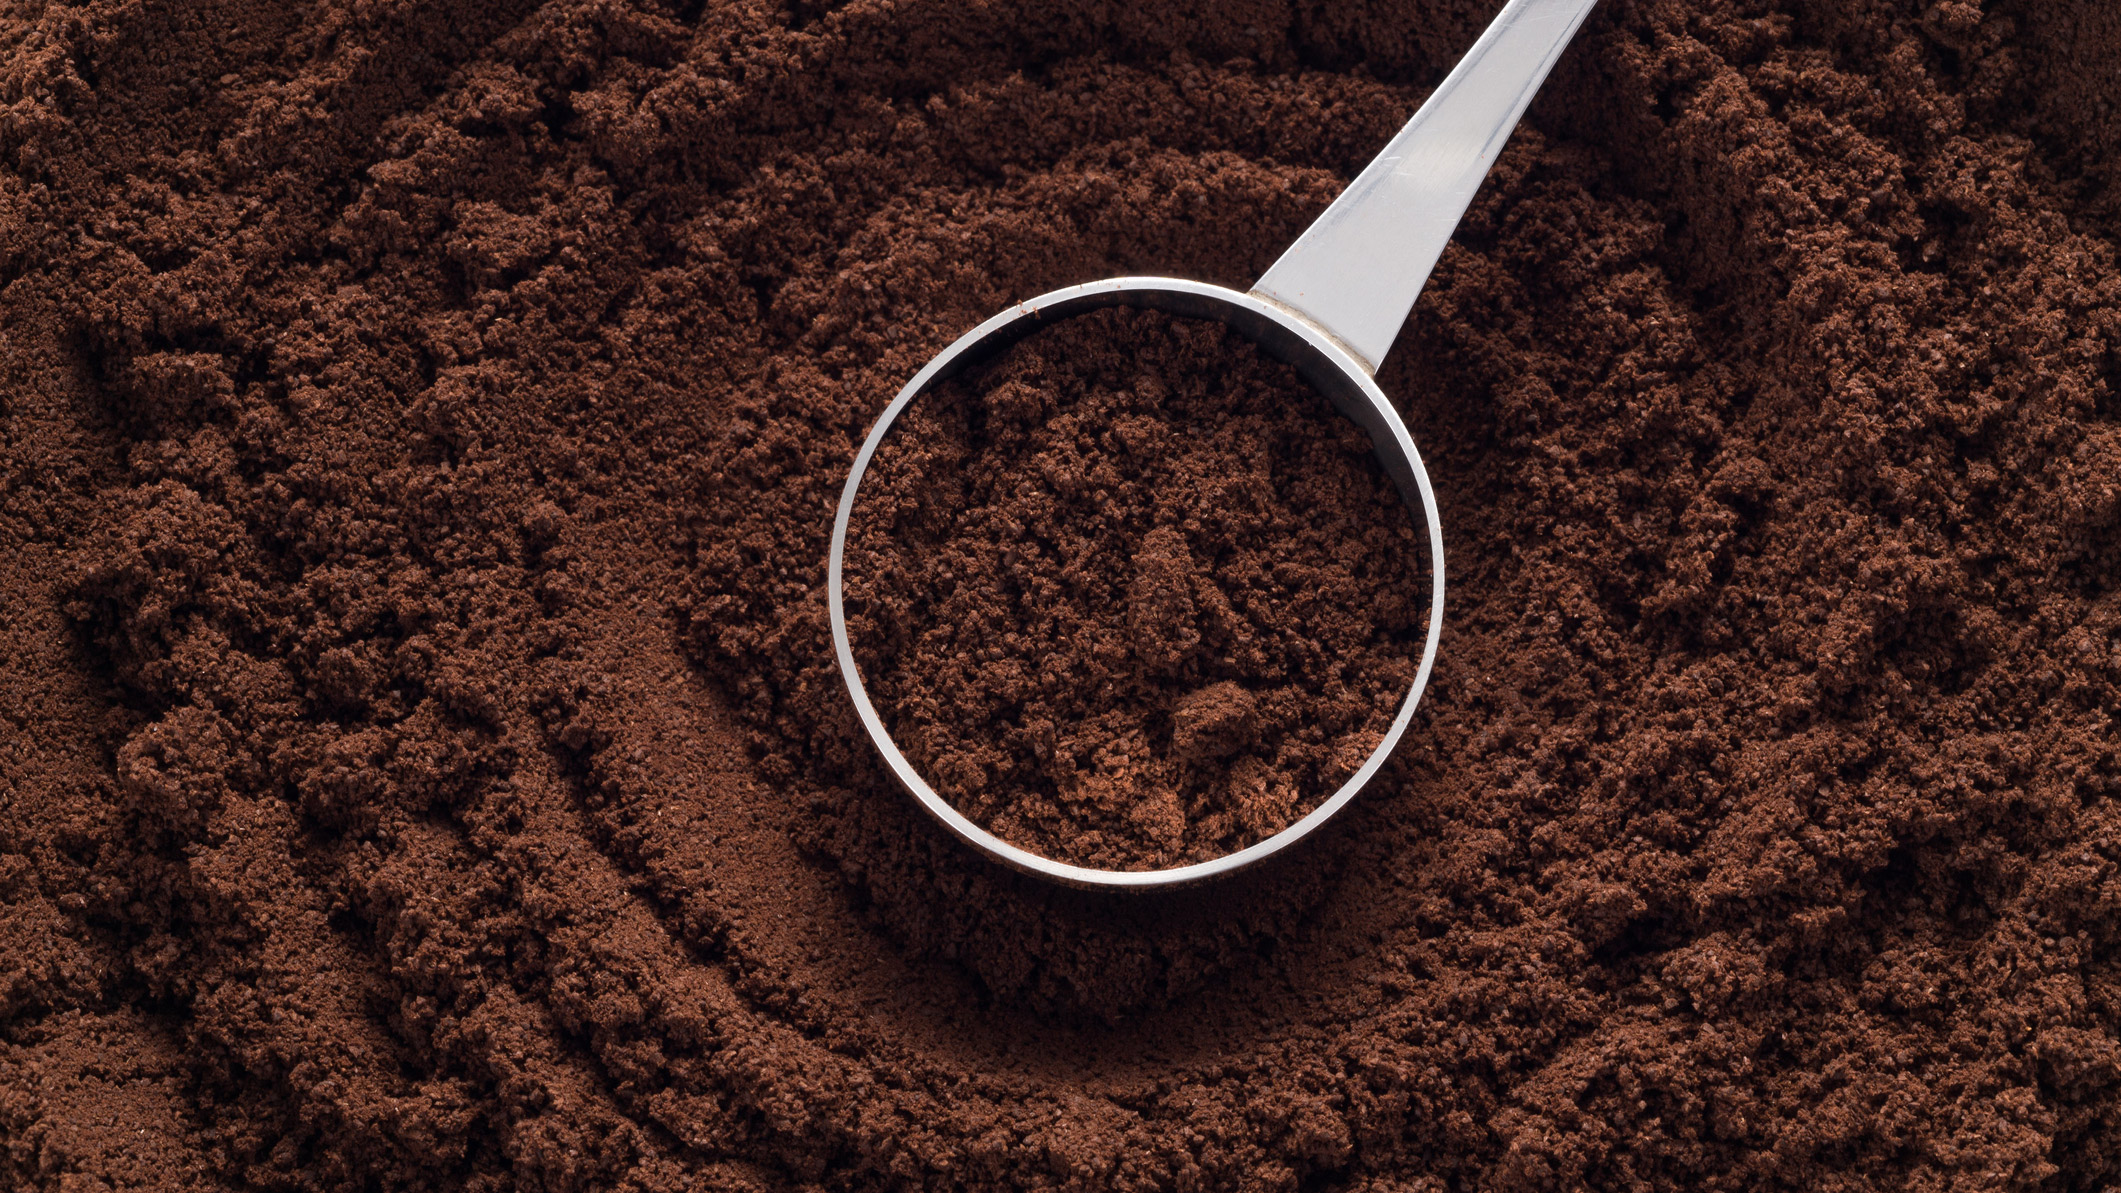 A scoop of ground coffee